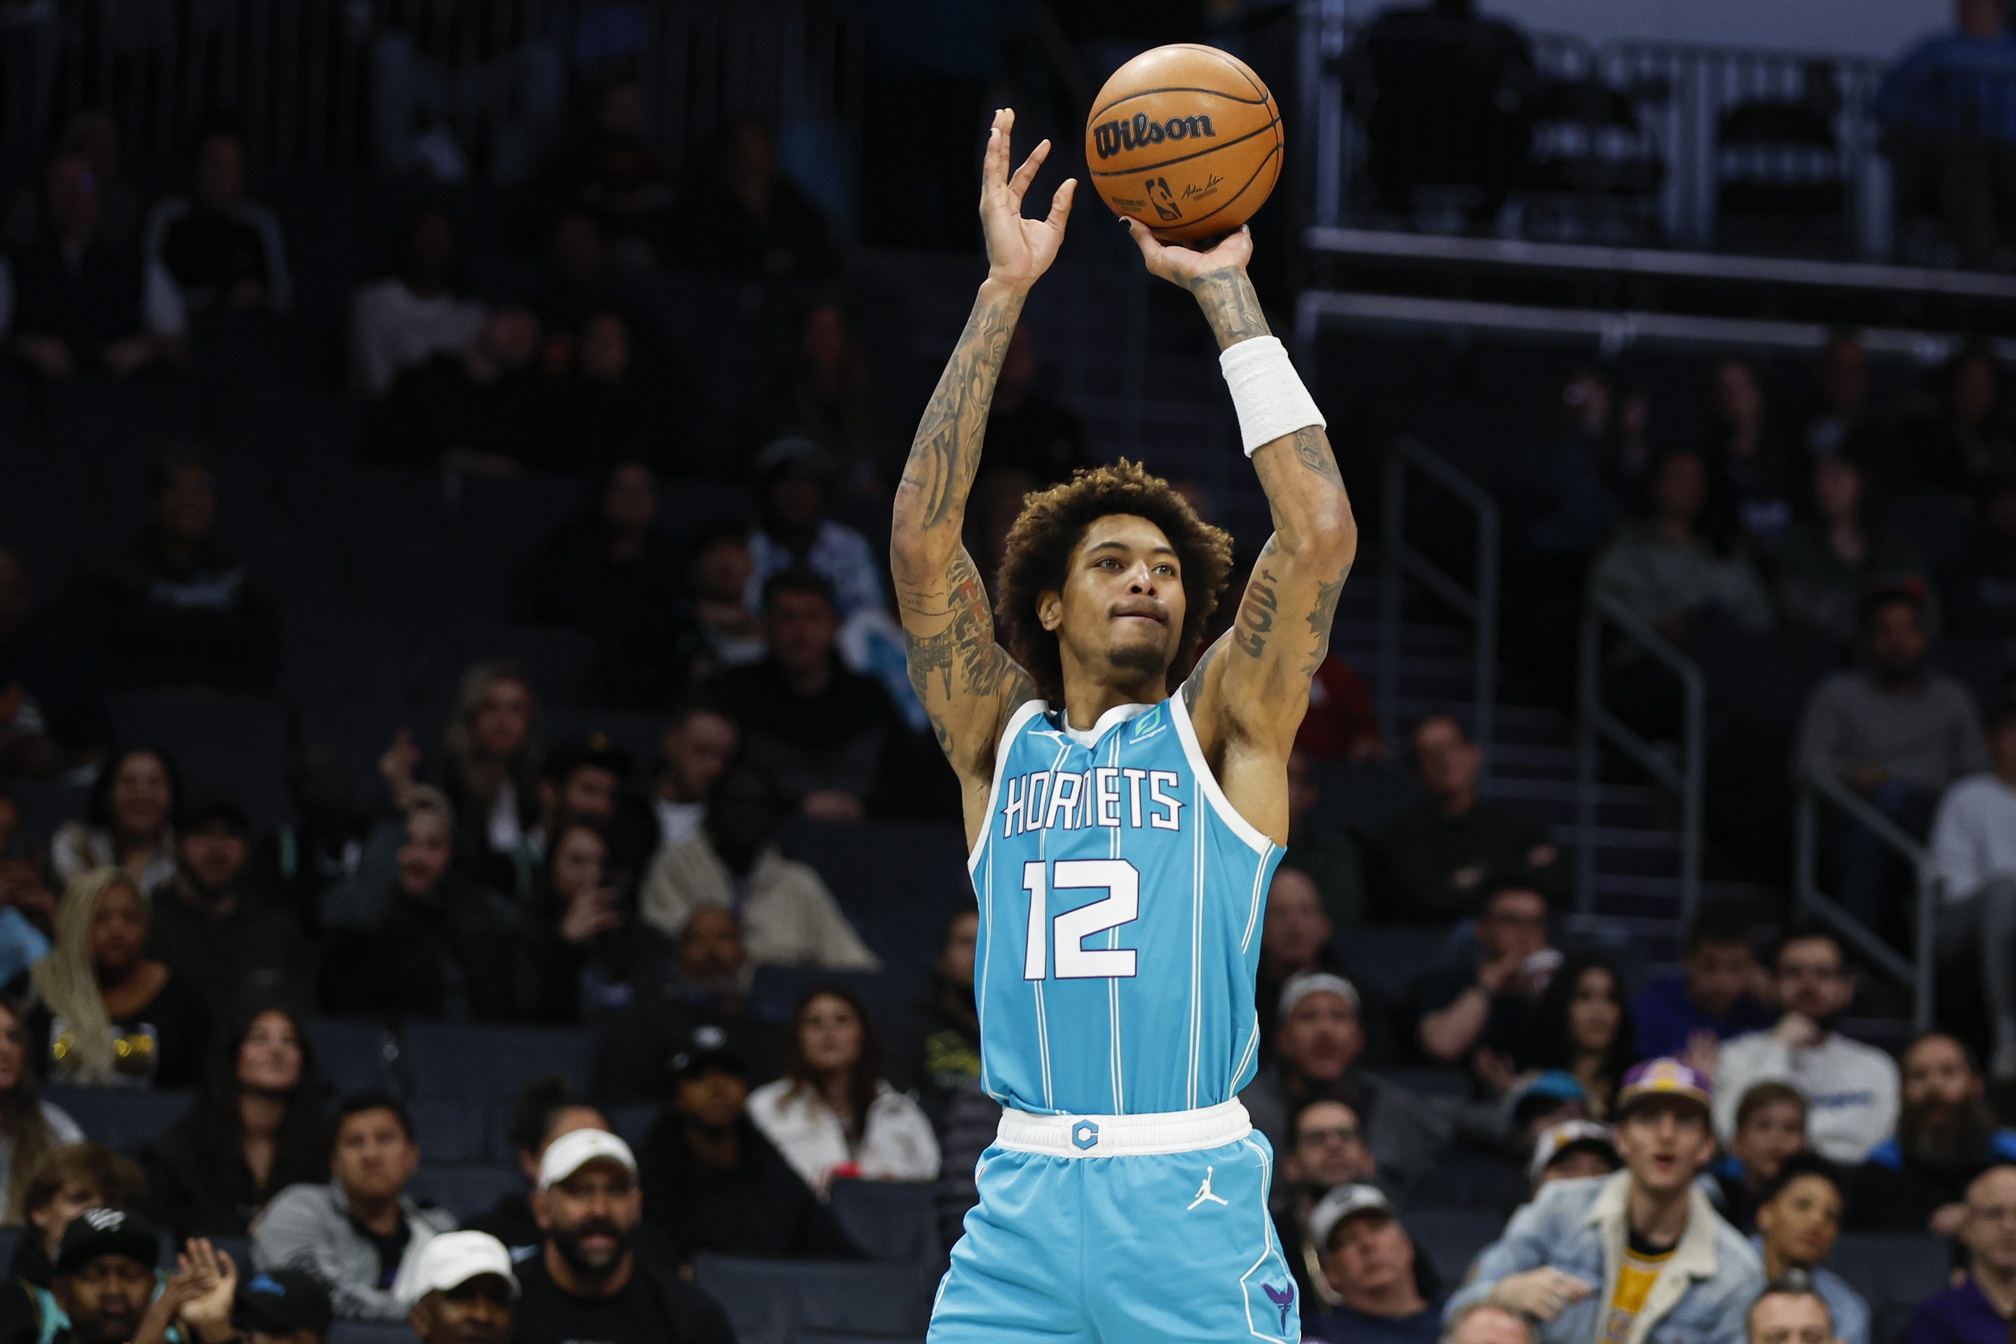 Mar 20, 2023; Charlotte, North Carolina, USA; Charlotte Hornets guard Kelly Oubre Jr. (12) shoots a 3-pointer against the Indiana Pacers during the second half at Spectrum Center. The Charlotte Hornets won 115-109. Mandatory Credit: Nell Redmond-USA TODAY Sports